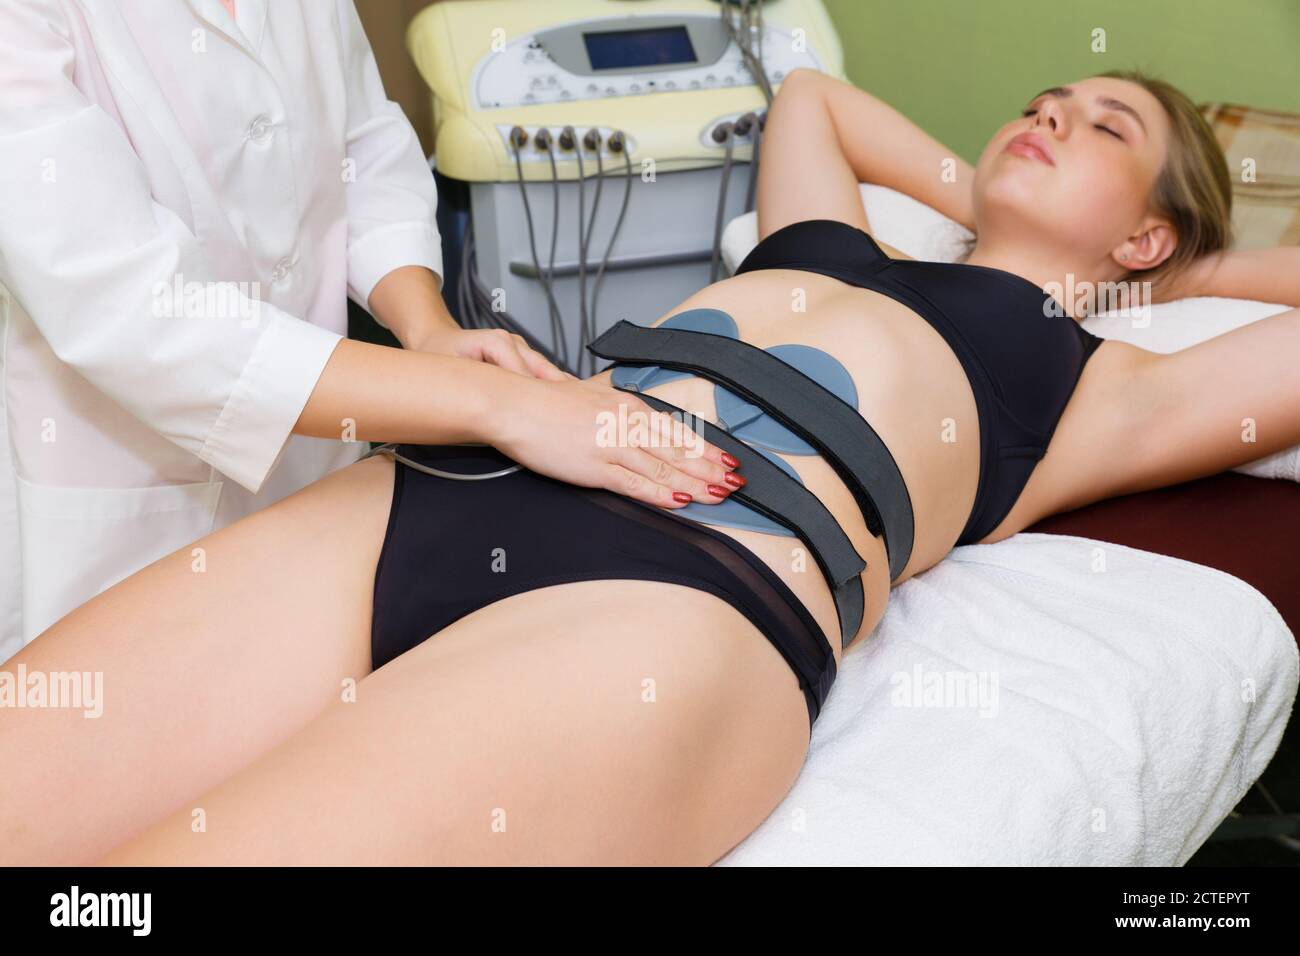 The spa specialist places the muscle myostimulation electrodes on the woman's abdomen. Stock Photo